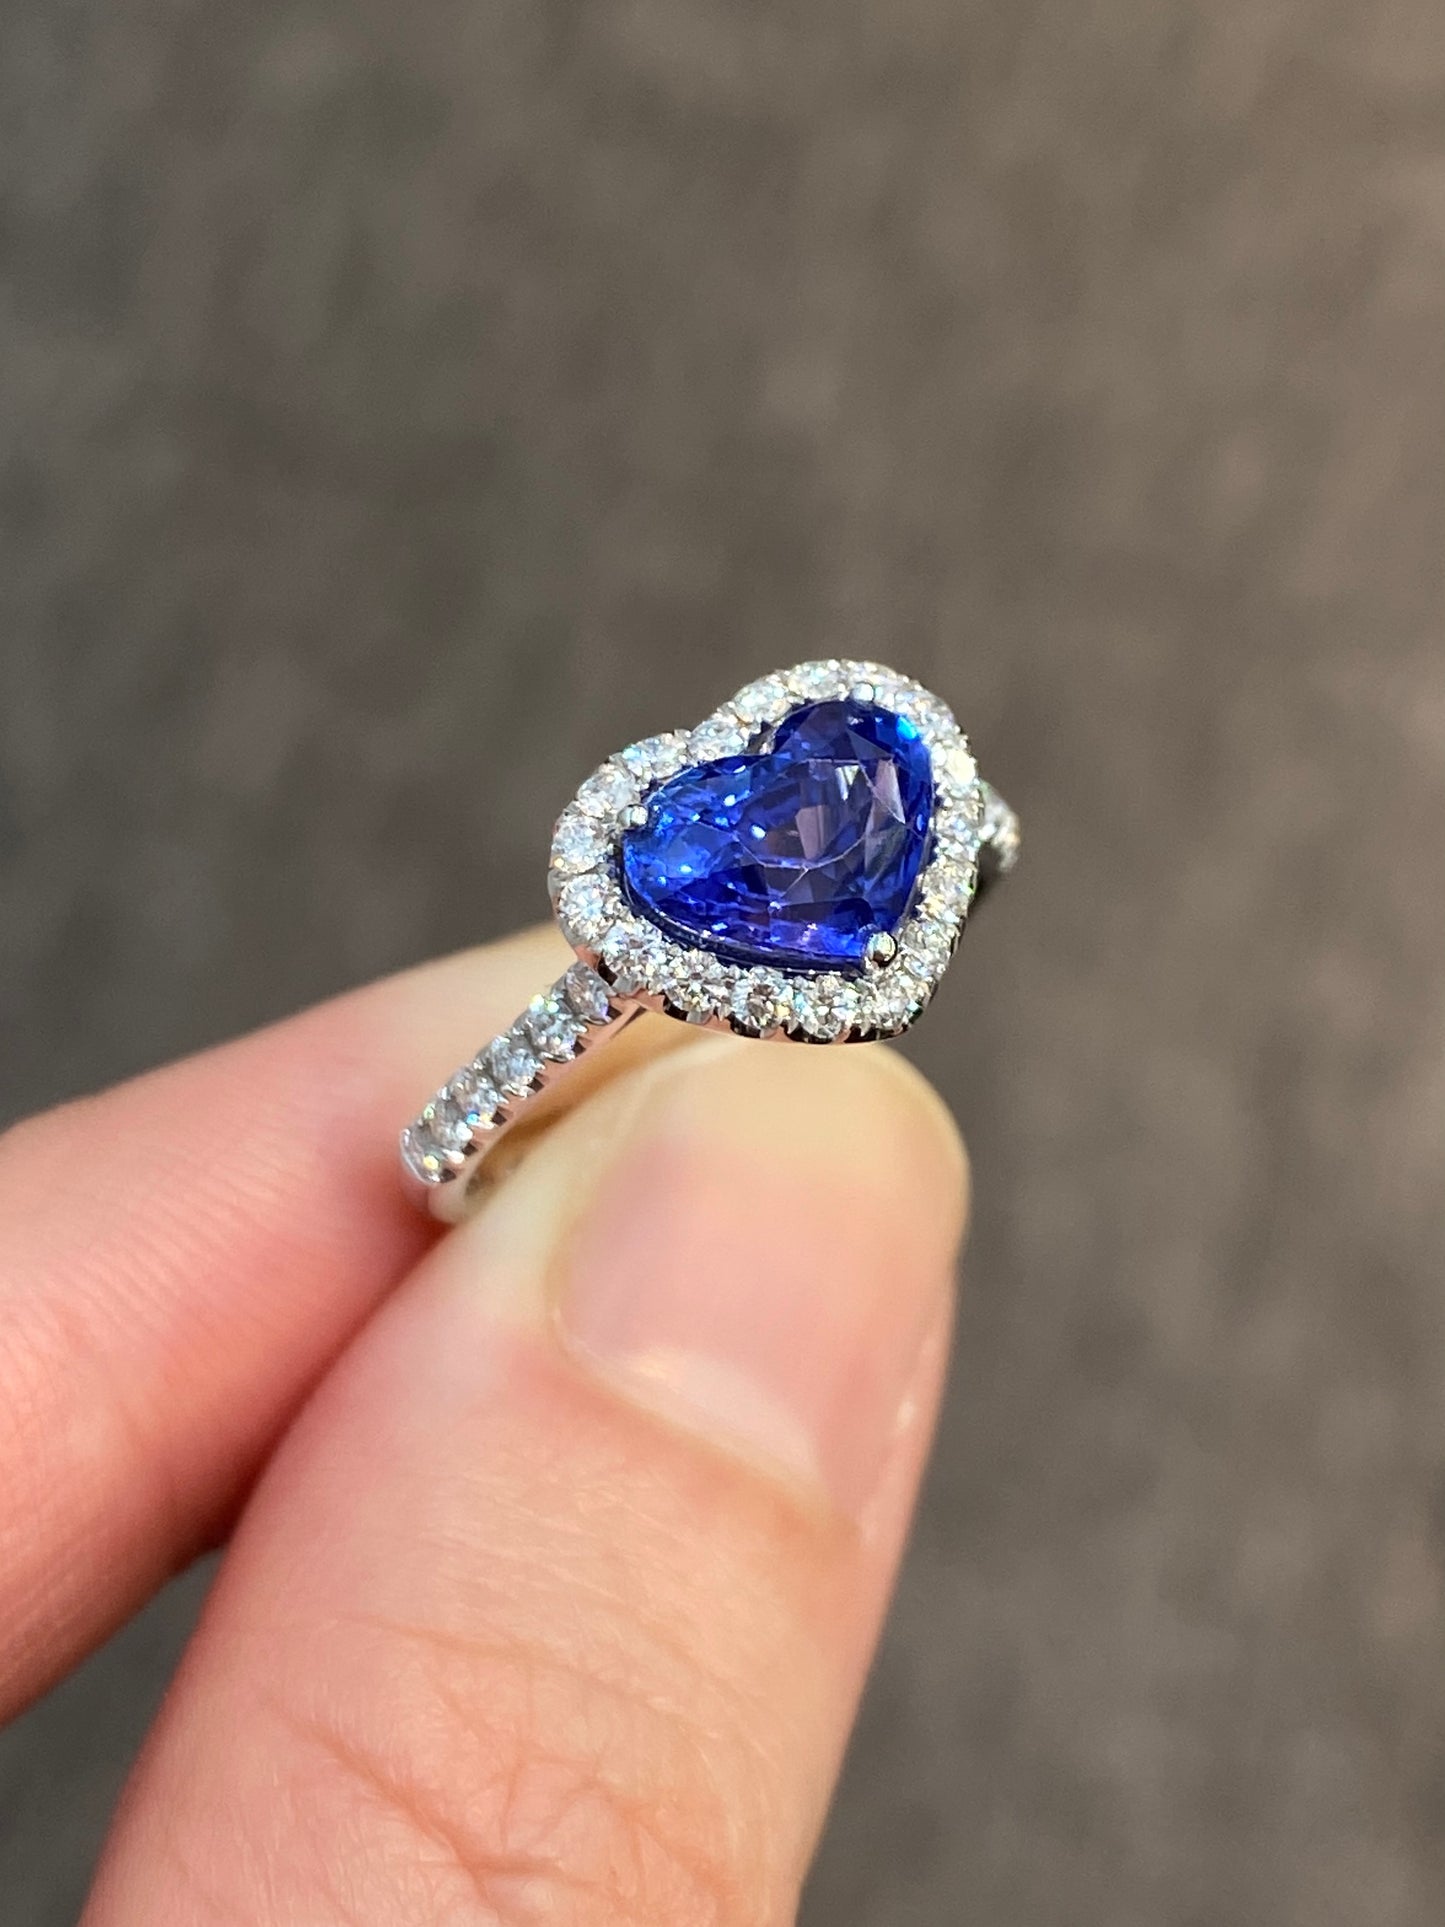 Natural Blue Sapphire Ring 2.18ct set with natural diamonds in 18k white gold